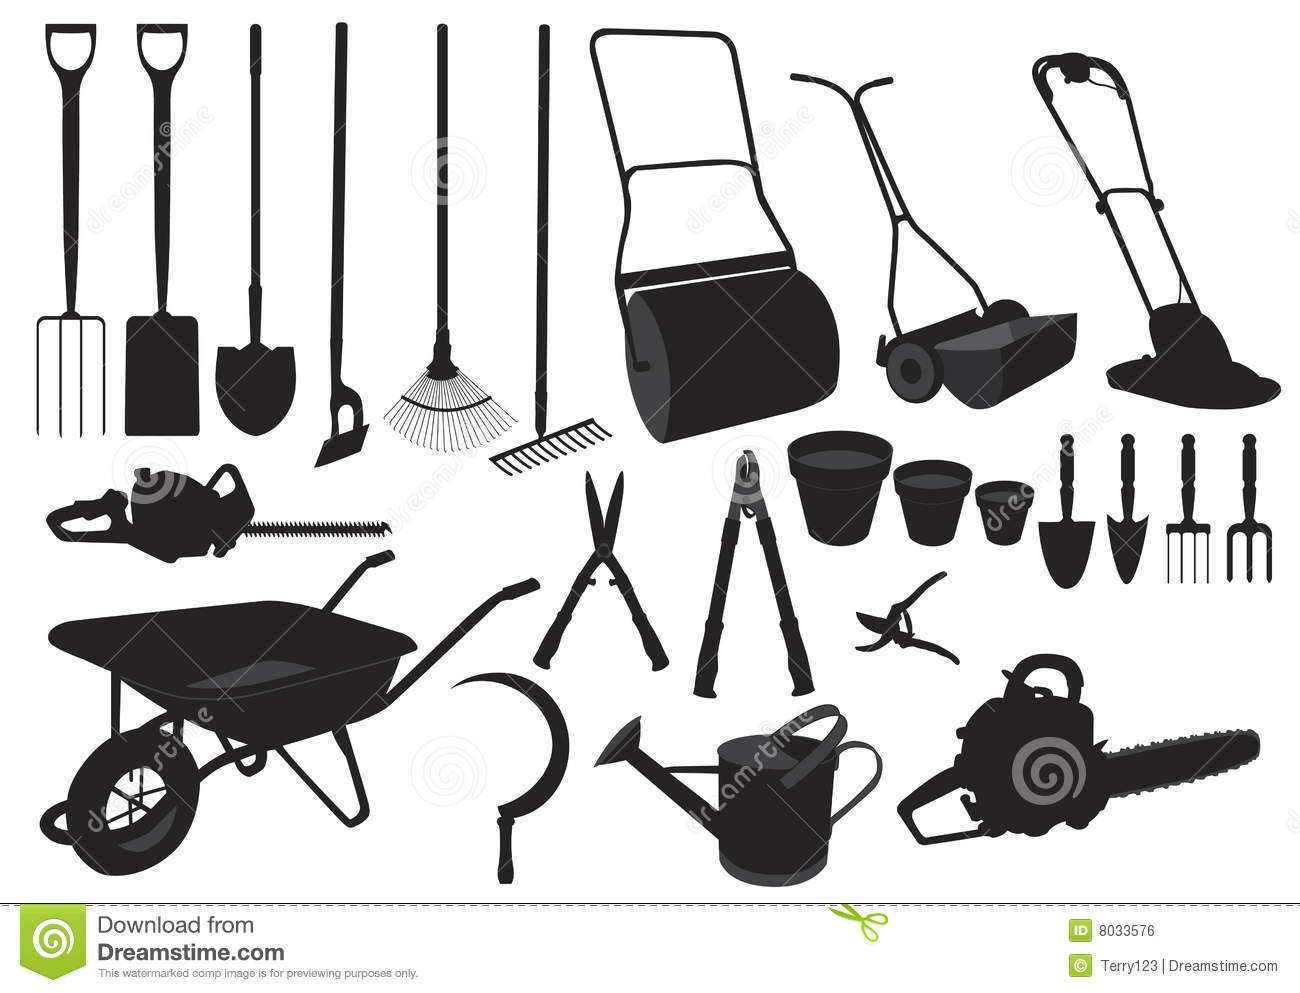 Silhouette Garden Tools Royalty Free Stock Image   Image  8033576